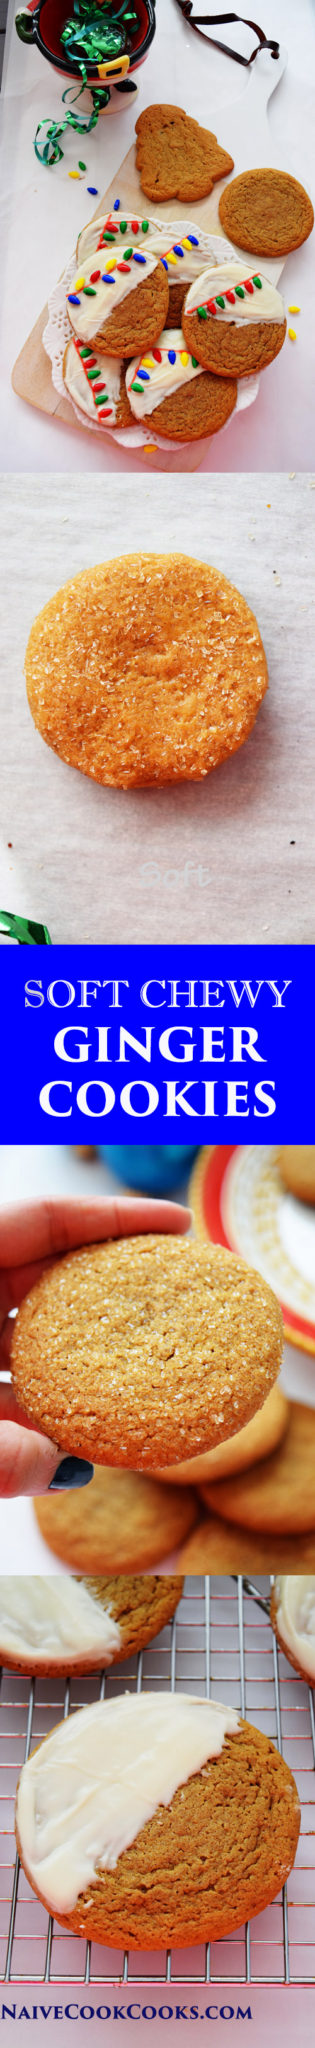 Soft Chewy Ginger Cookies for Pinterest